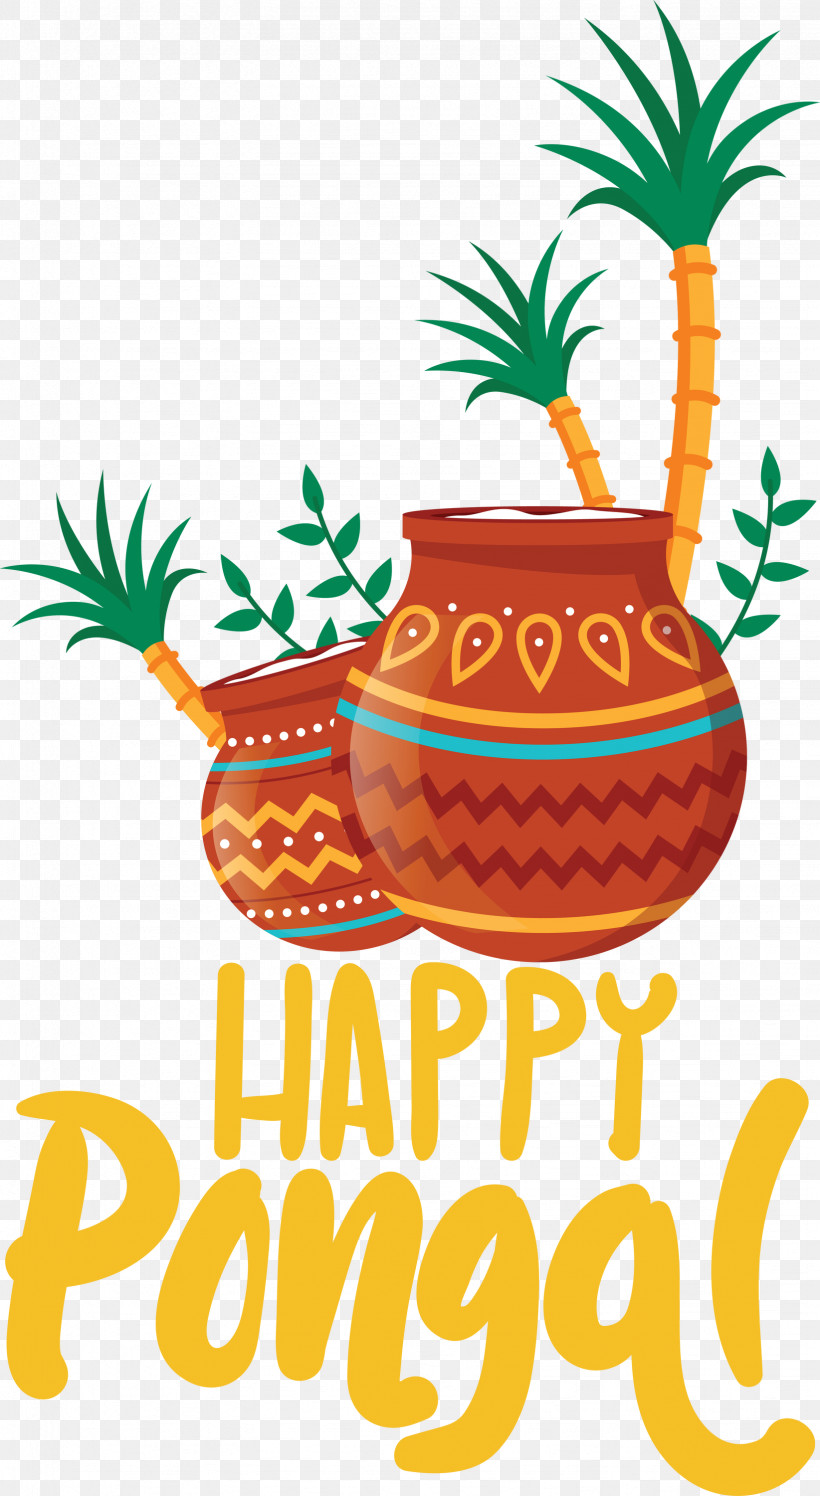 Pongal Happy Pongal Harvest Festival, PNG, 1644x3000px, Pongal, Festival, Happy Pongal, Harvest Festival, Holiday Download Free